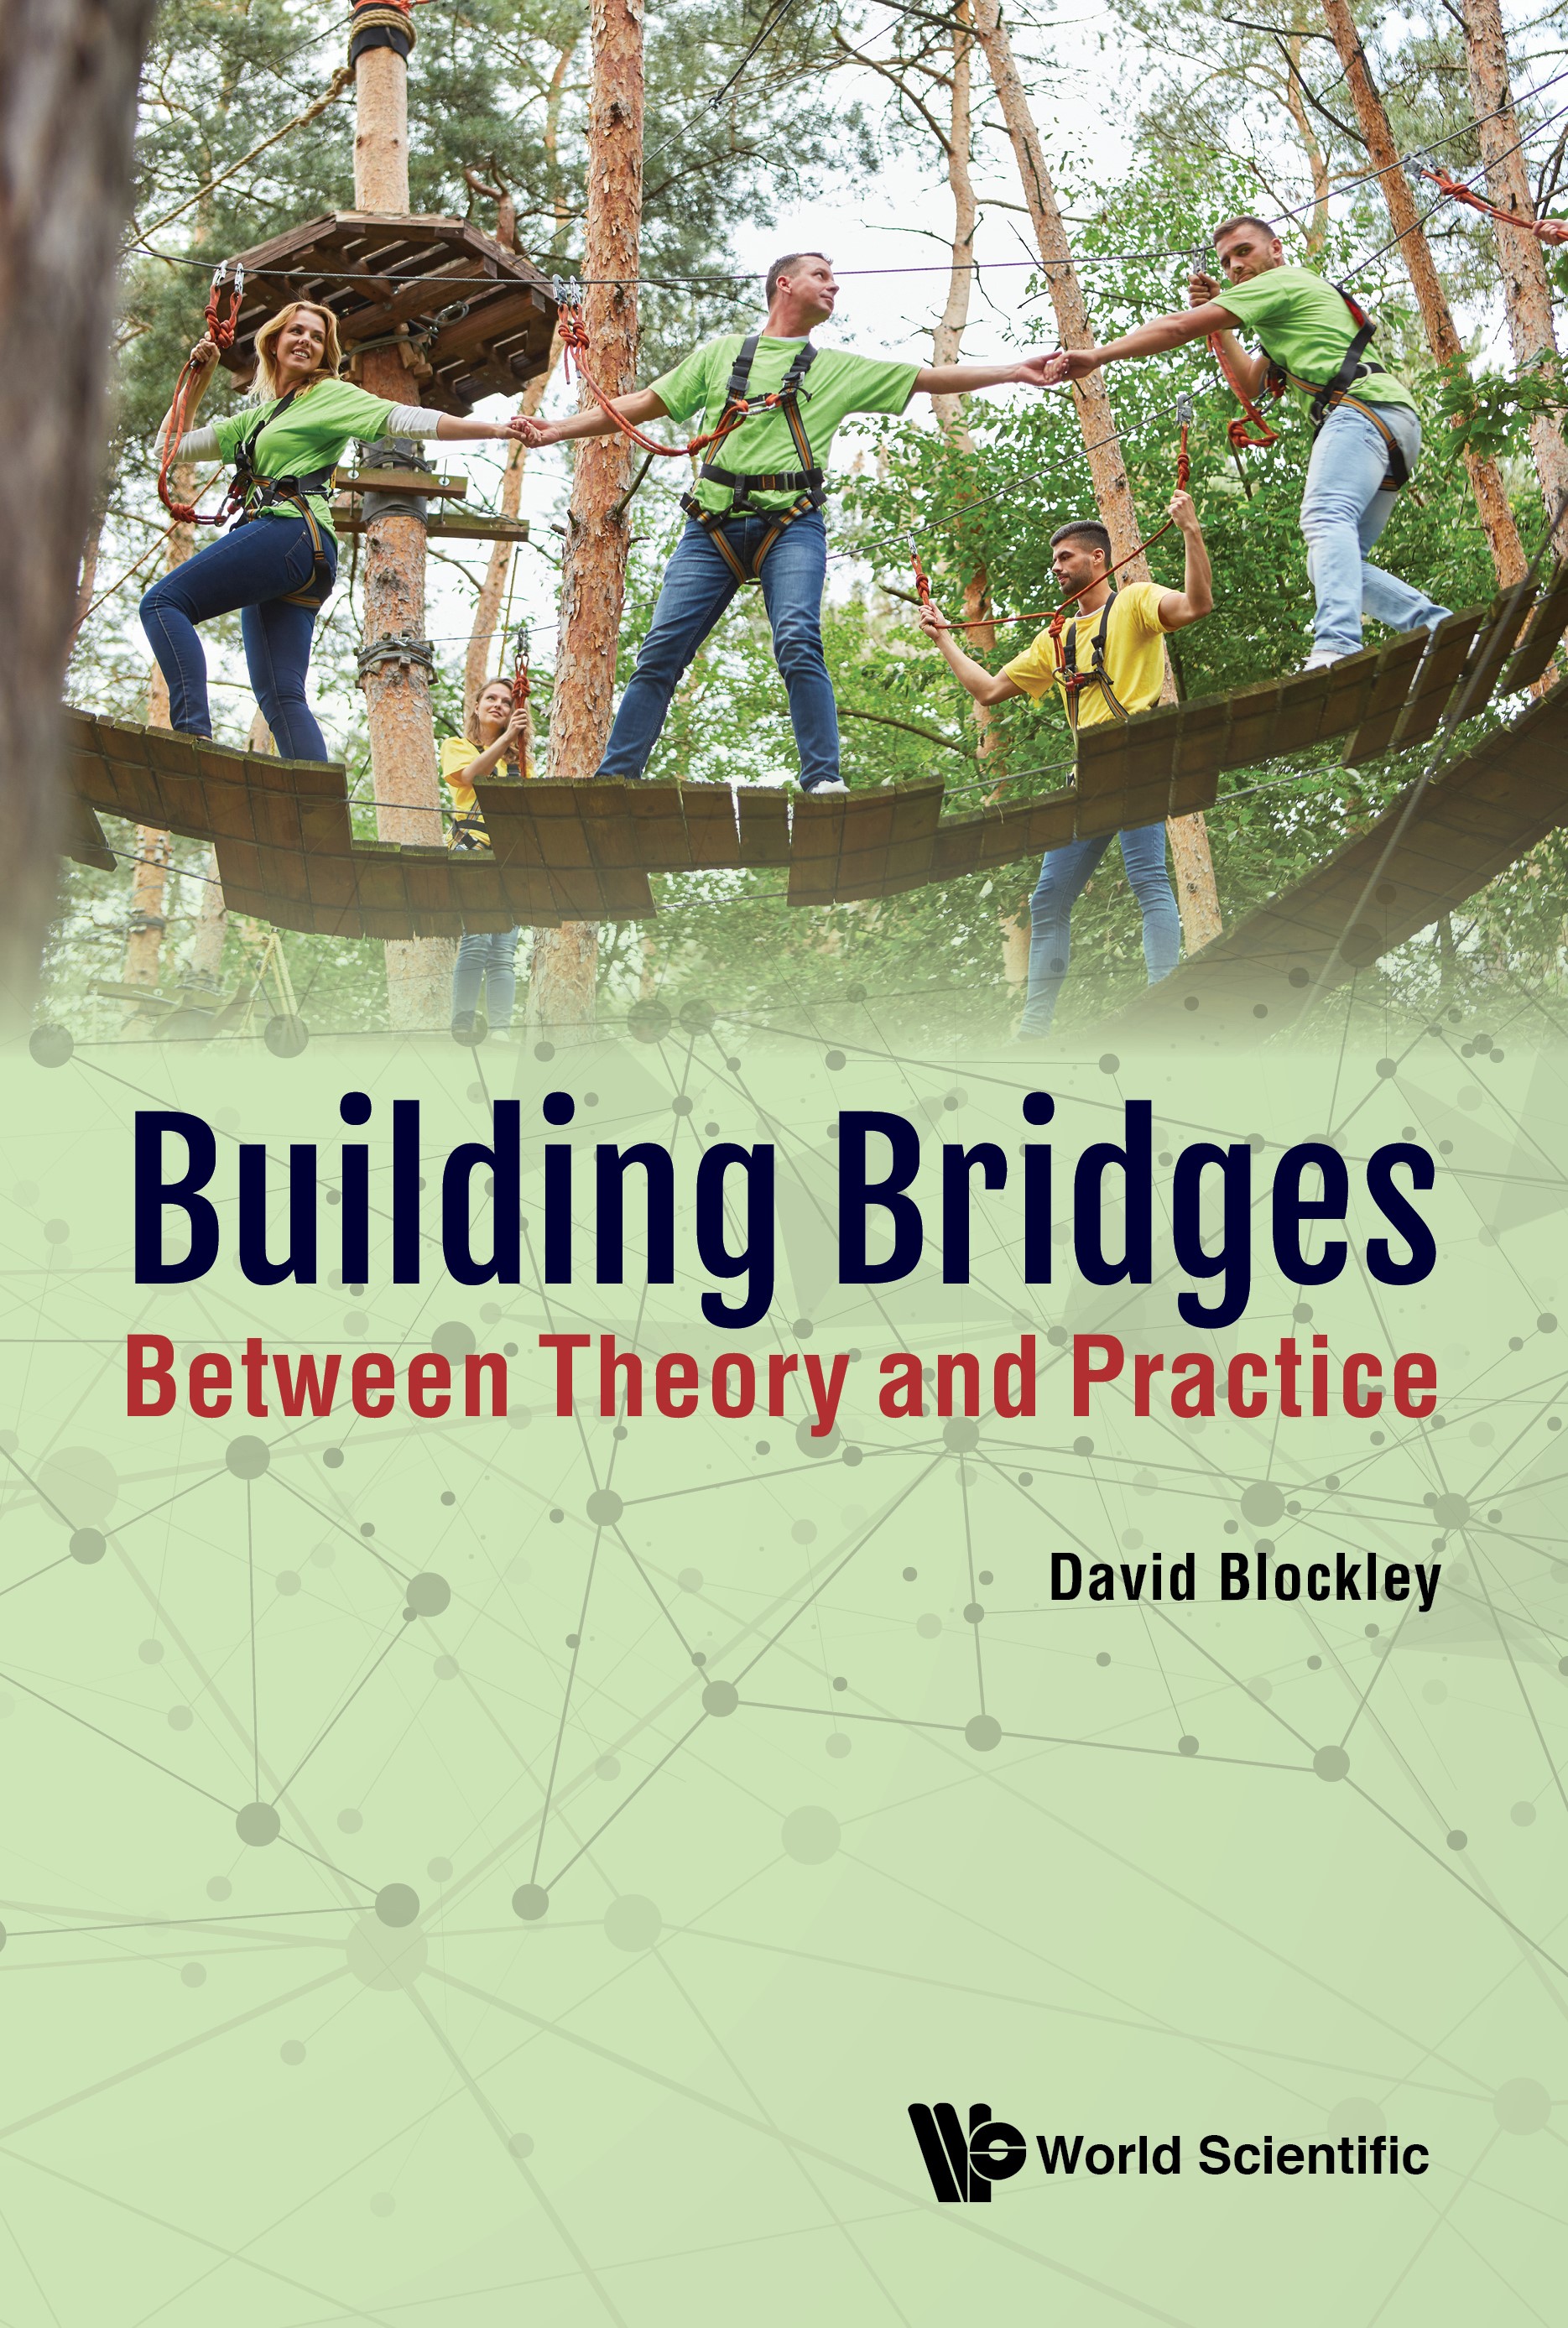 green book cover showing people crossing a bridge